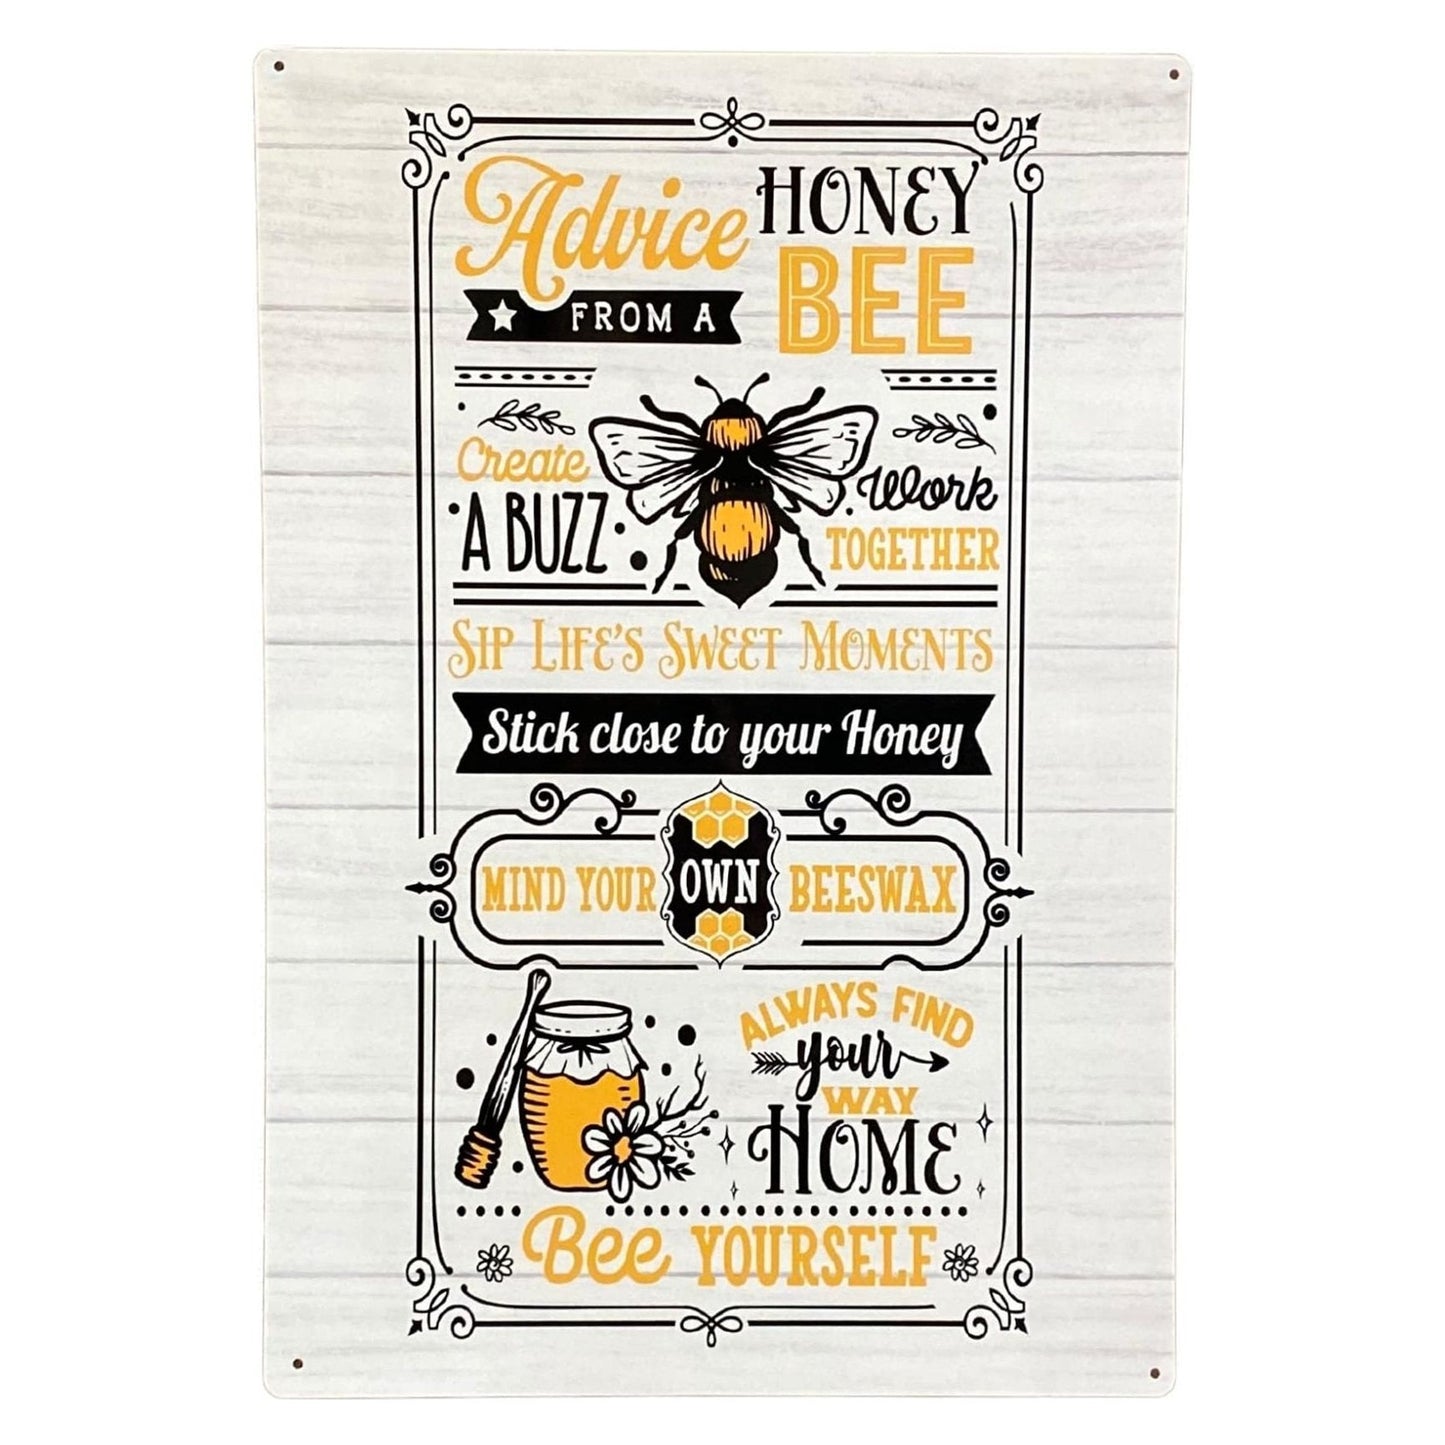 Metal Sign Plaque - Advice From A Honey Bee - Ashton and Finch